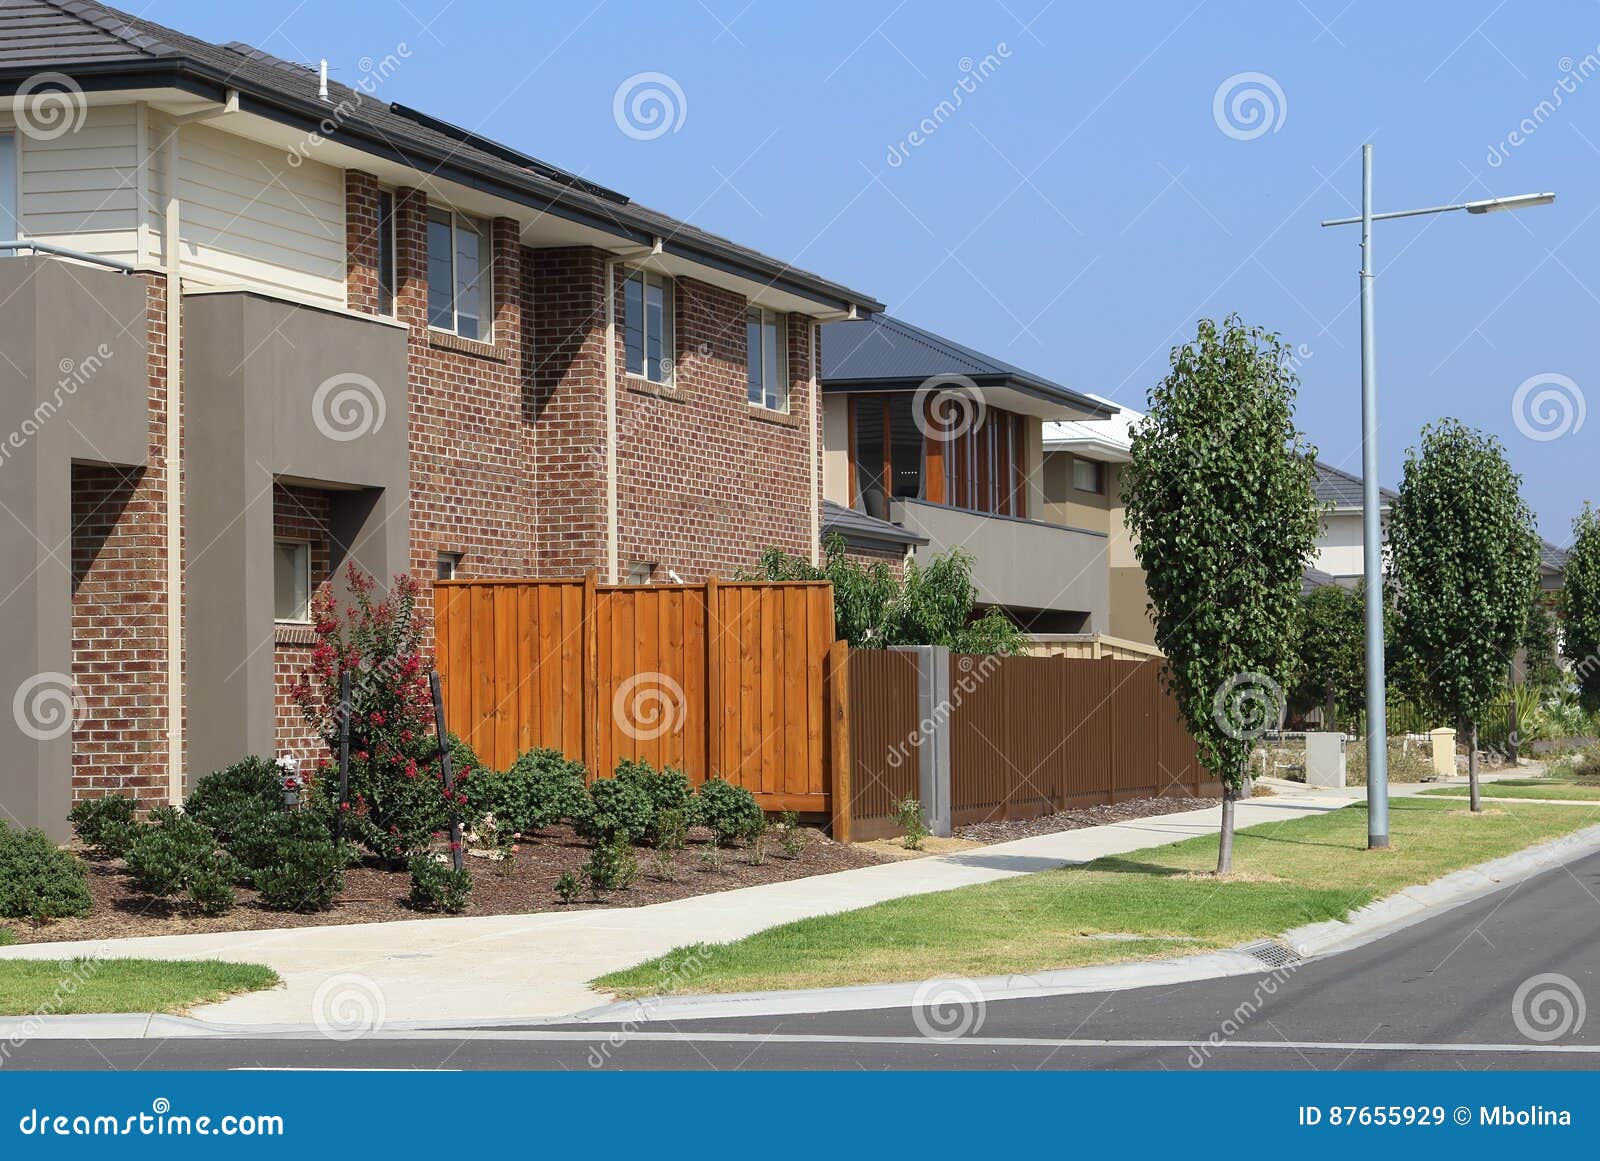 Suburban Street With Modern Houses Stock Image Image Of Style Street